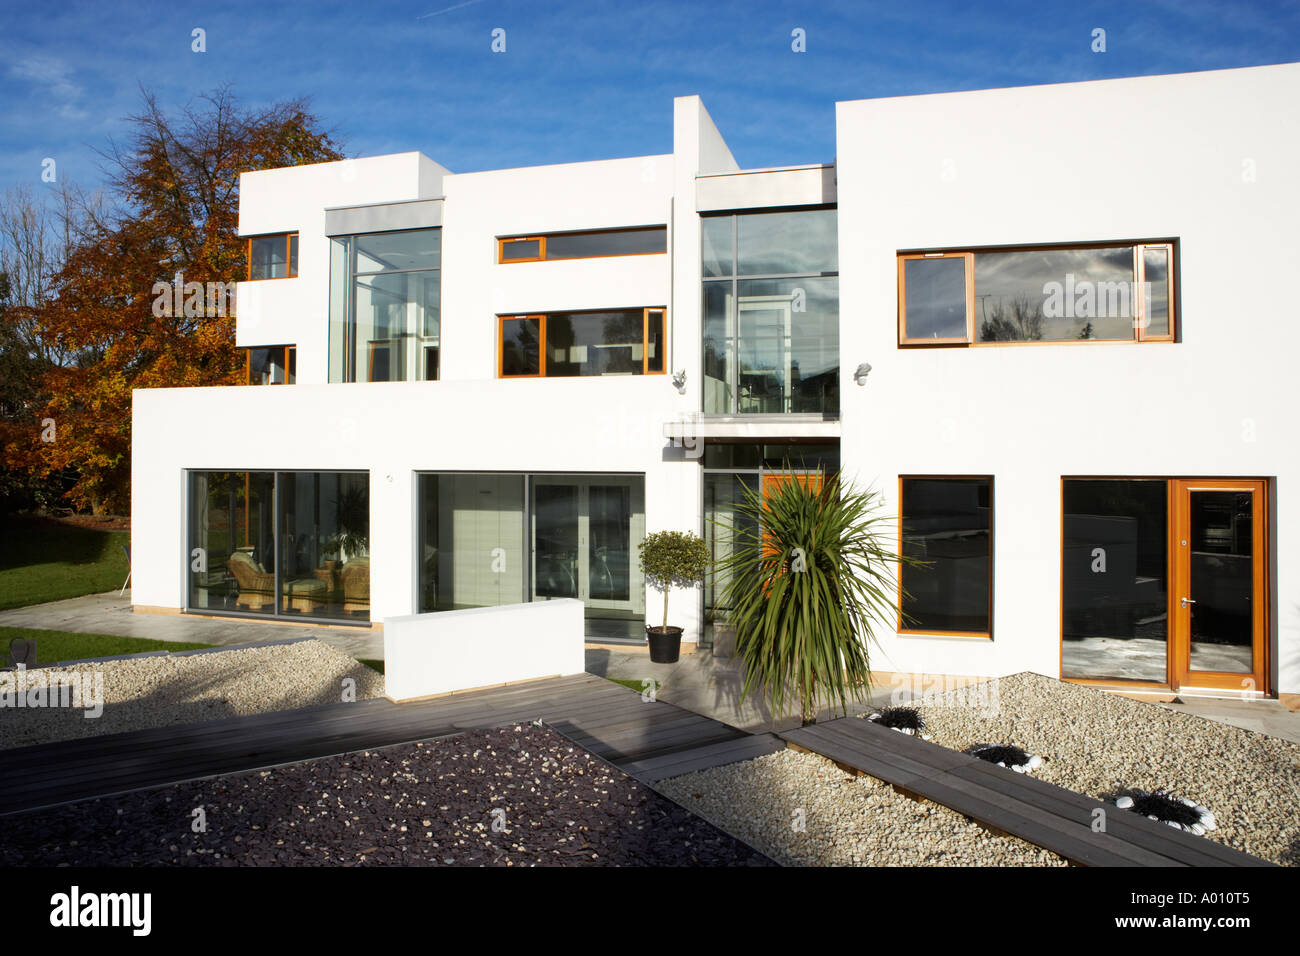 Modern Art Deco Style House With White Gravel Garden And Large Patio Doors  Stock Photo - Alamy